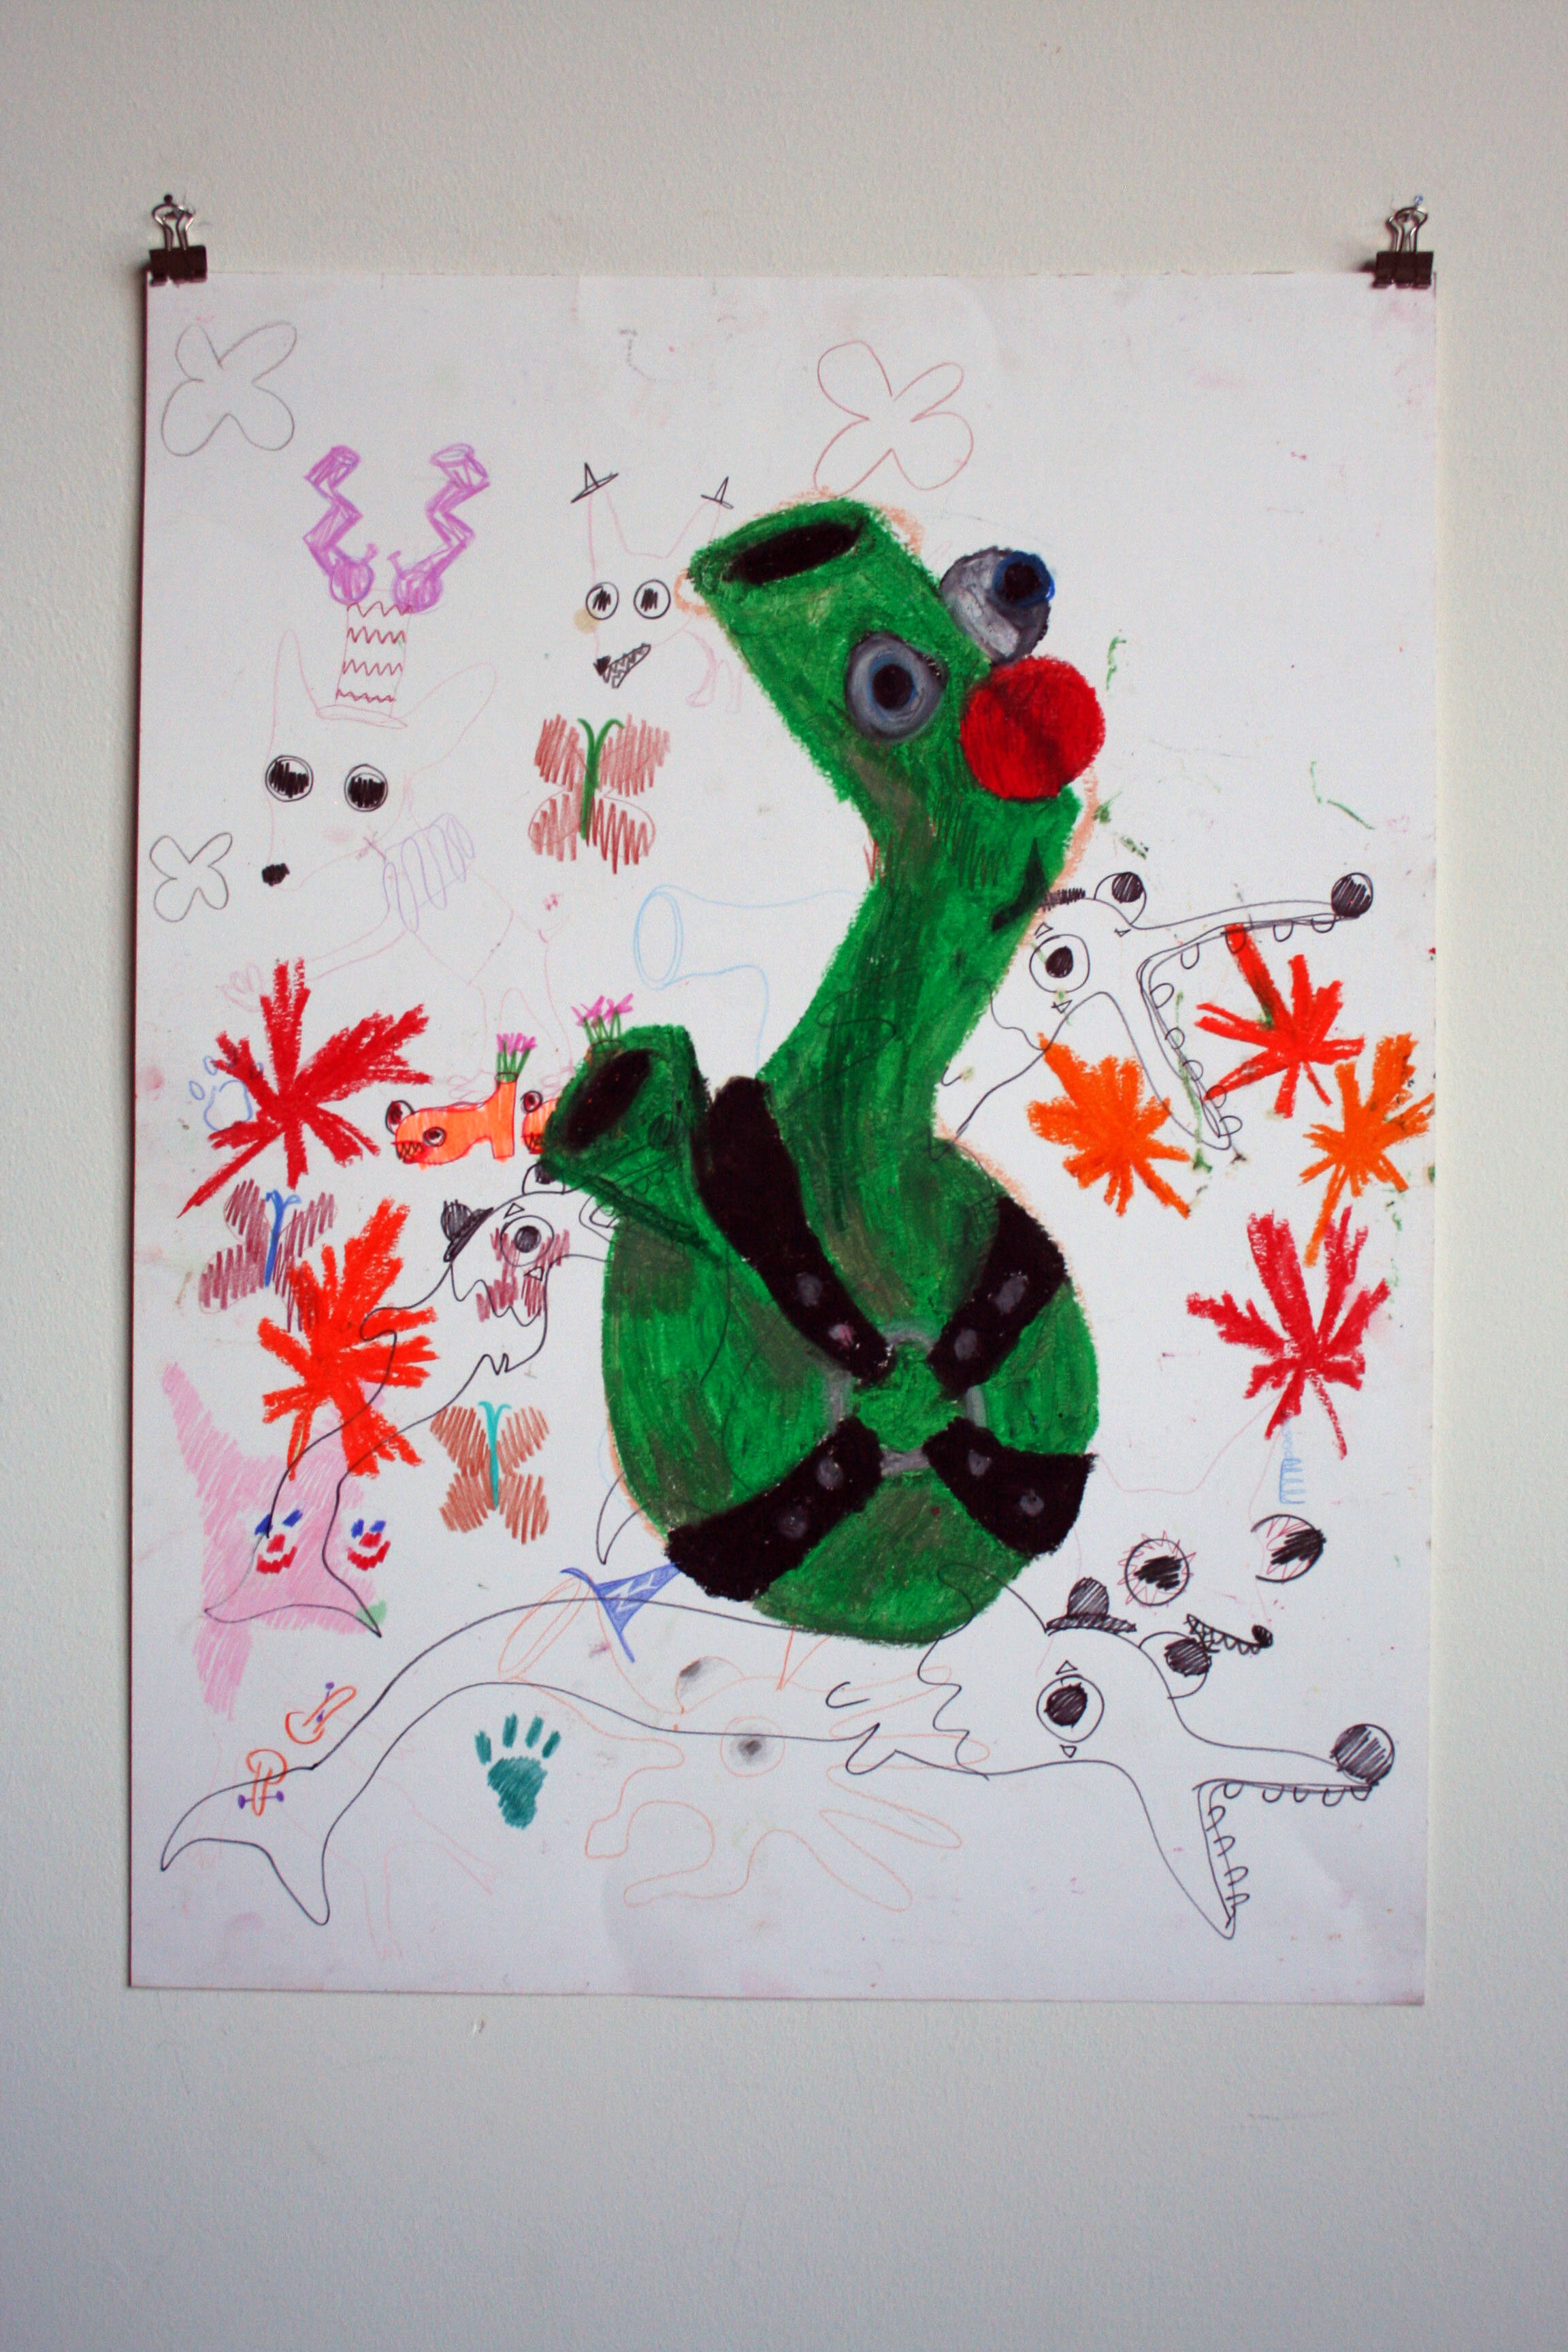   Bondage Bong,  2013  24 x 18 inches (60.96 x 45.72 cm.)  Oil pastel and marker on paper 